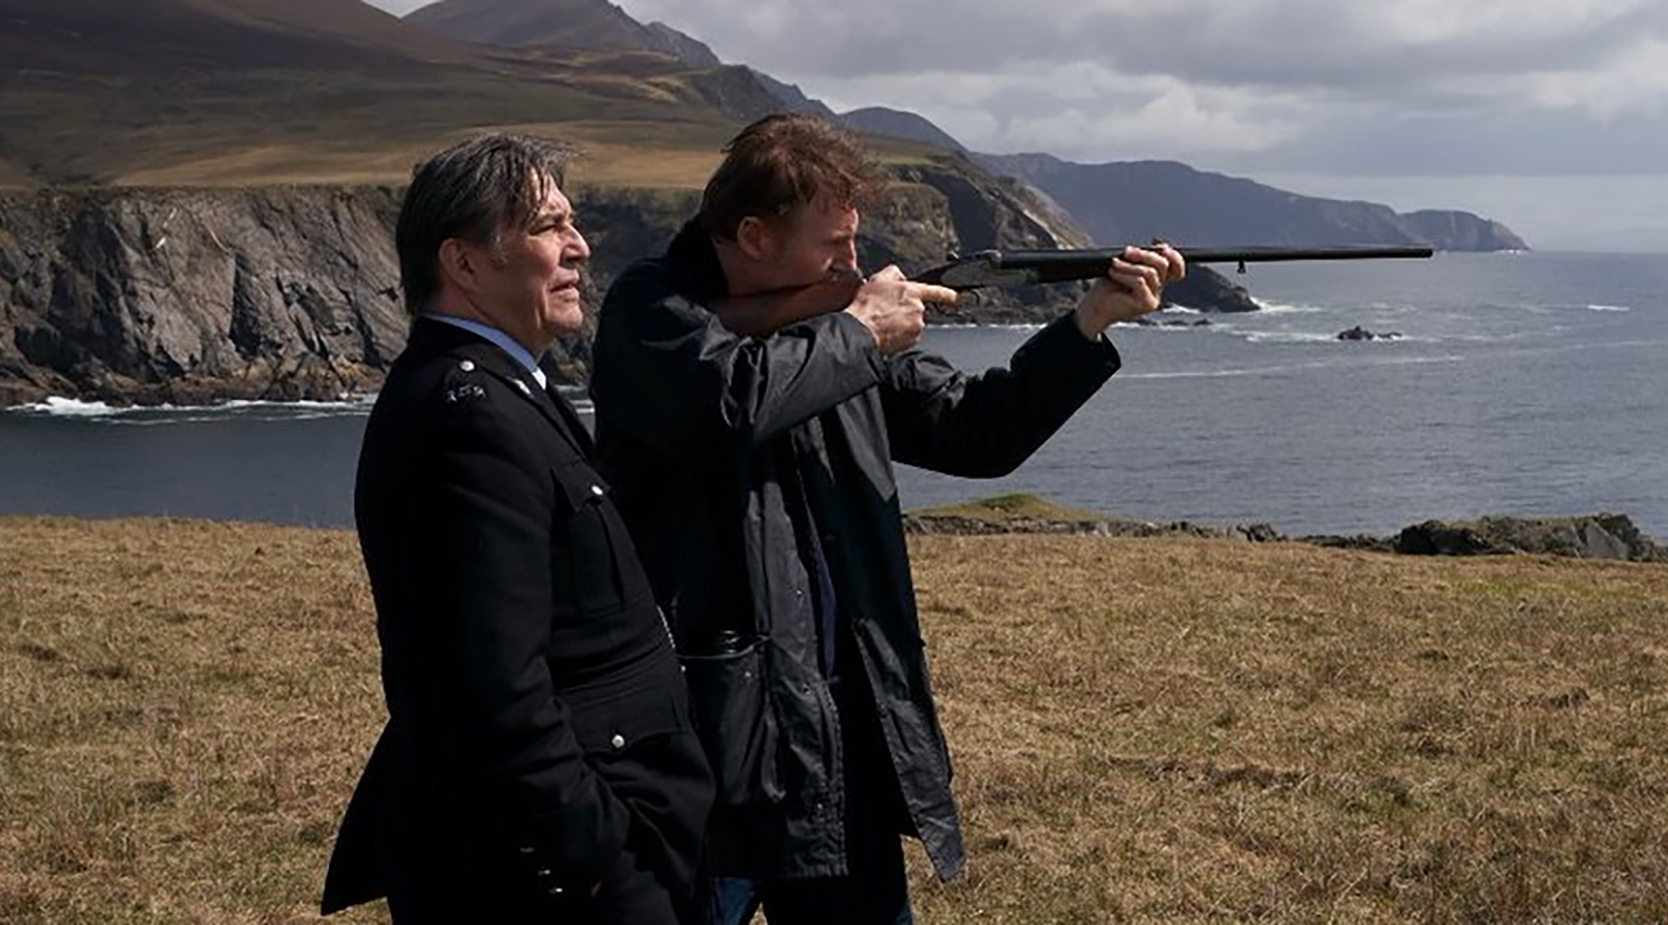 Ciarán Hinds as Vinnie and Liam Neeson as Finbar stand on a cliff in 'In the Land of Saints and Sinners'